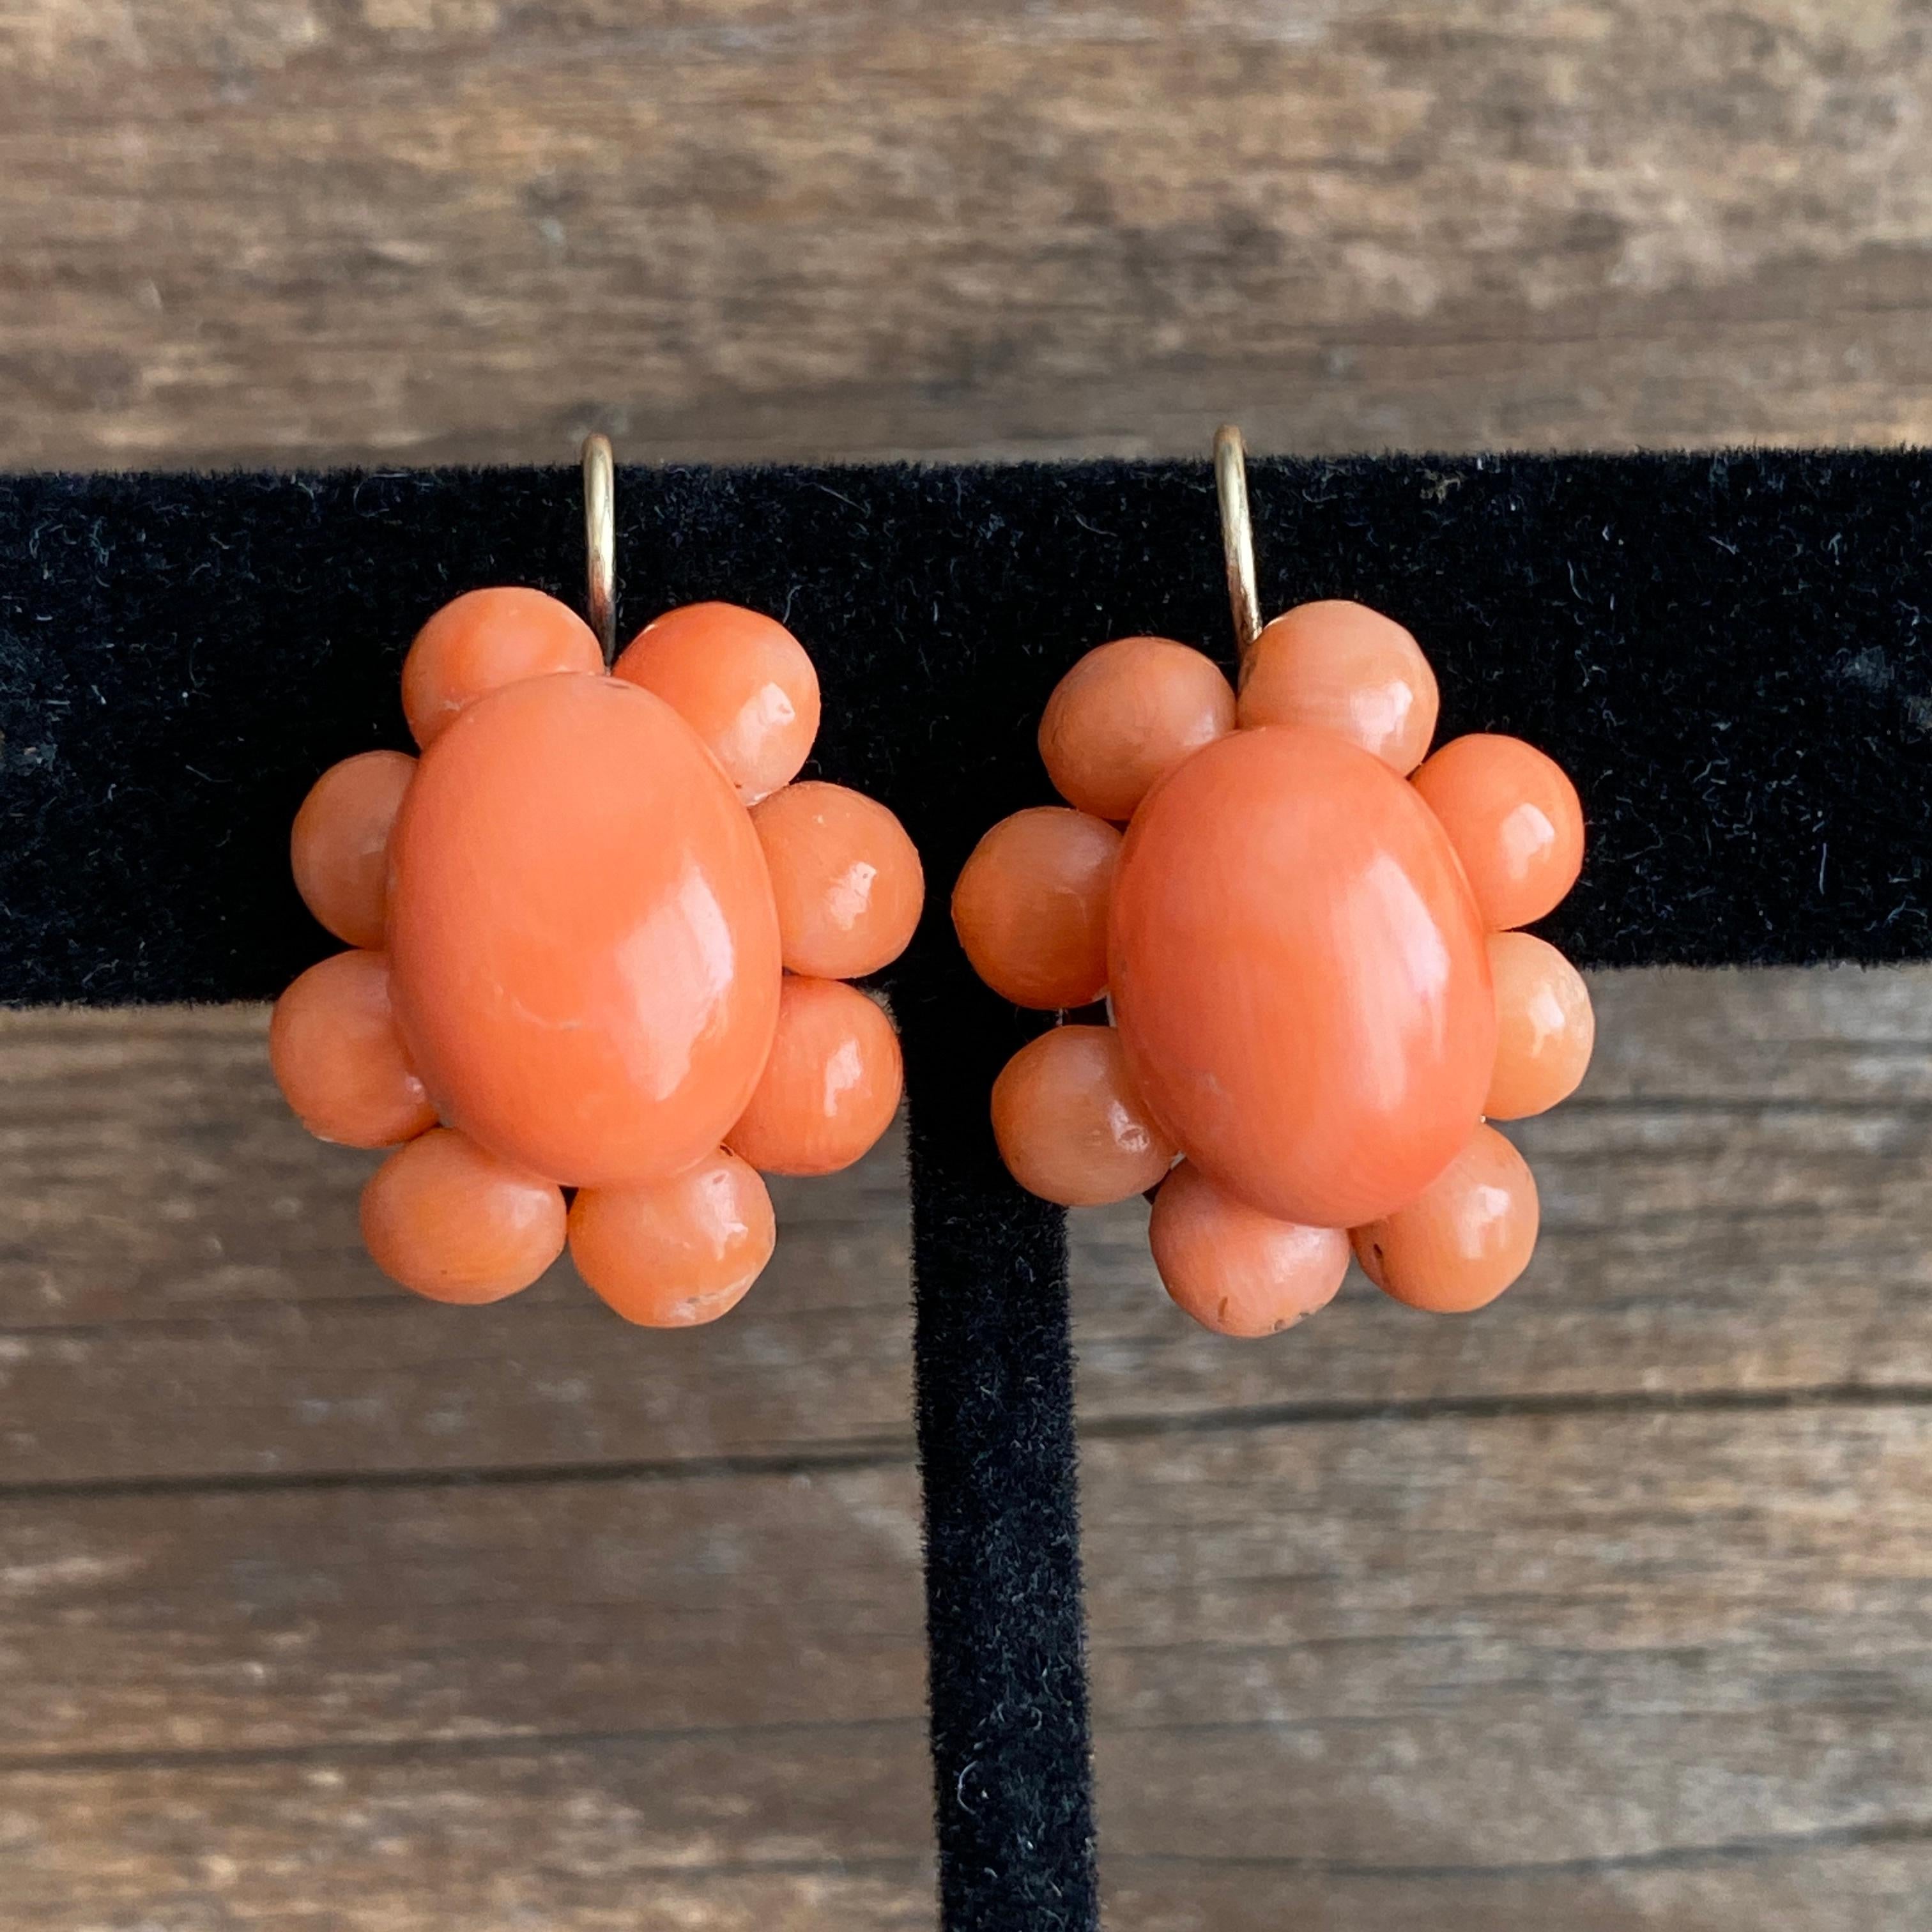 Details:
Lovely Victorian natural red coral earrings with 14K gold fastening ear wires. The red coral earrings are floral in theme. They are lightweight on, and wear nicely. Intact natural red coral earrings are difficult to find, and are becoming